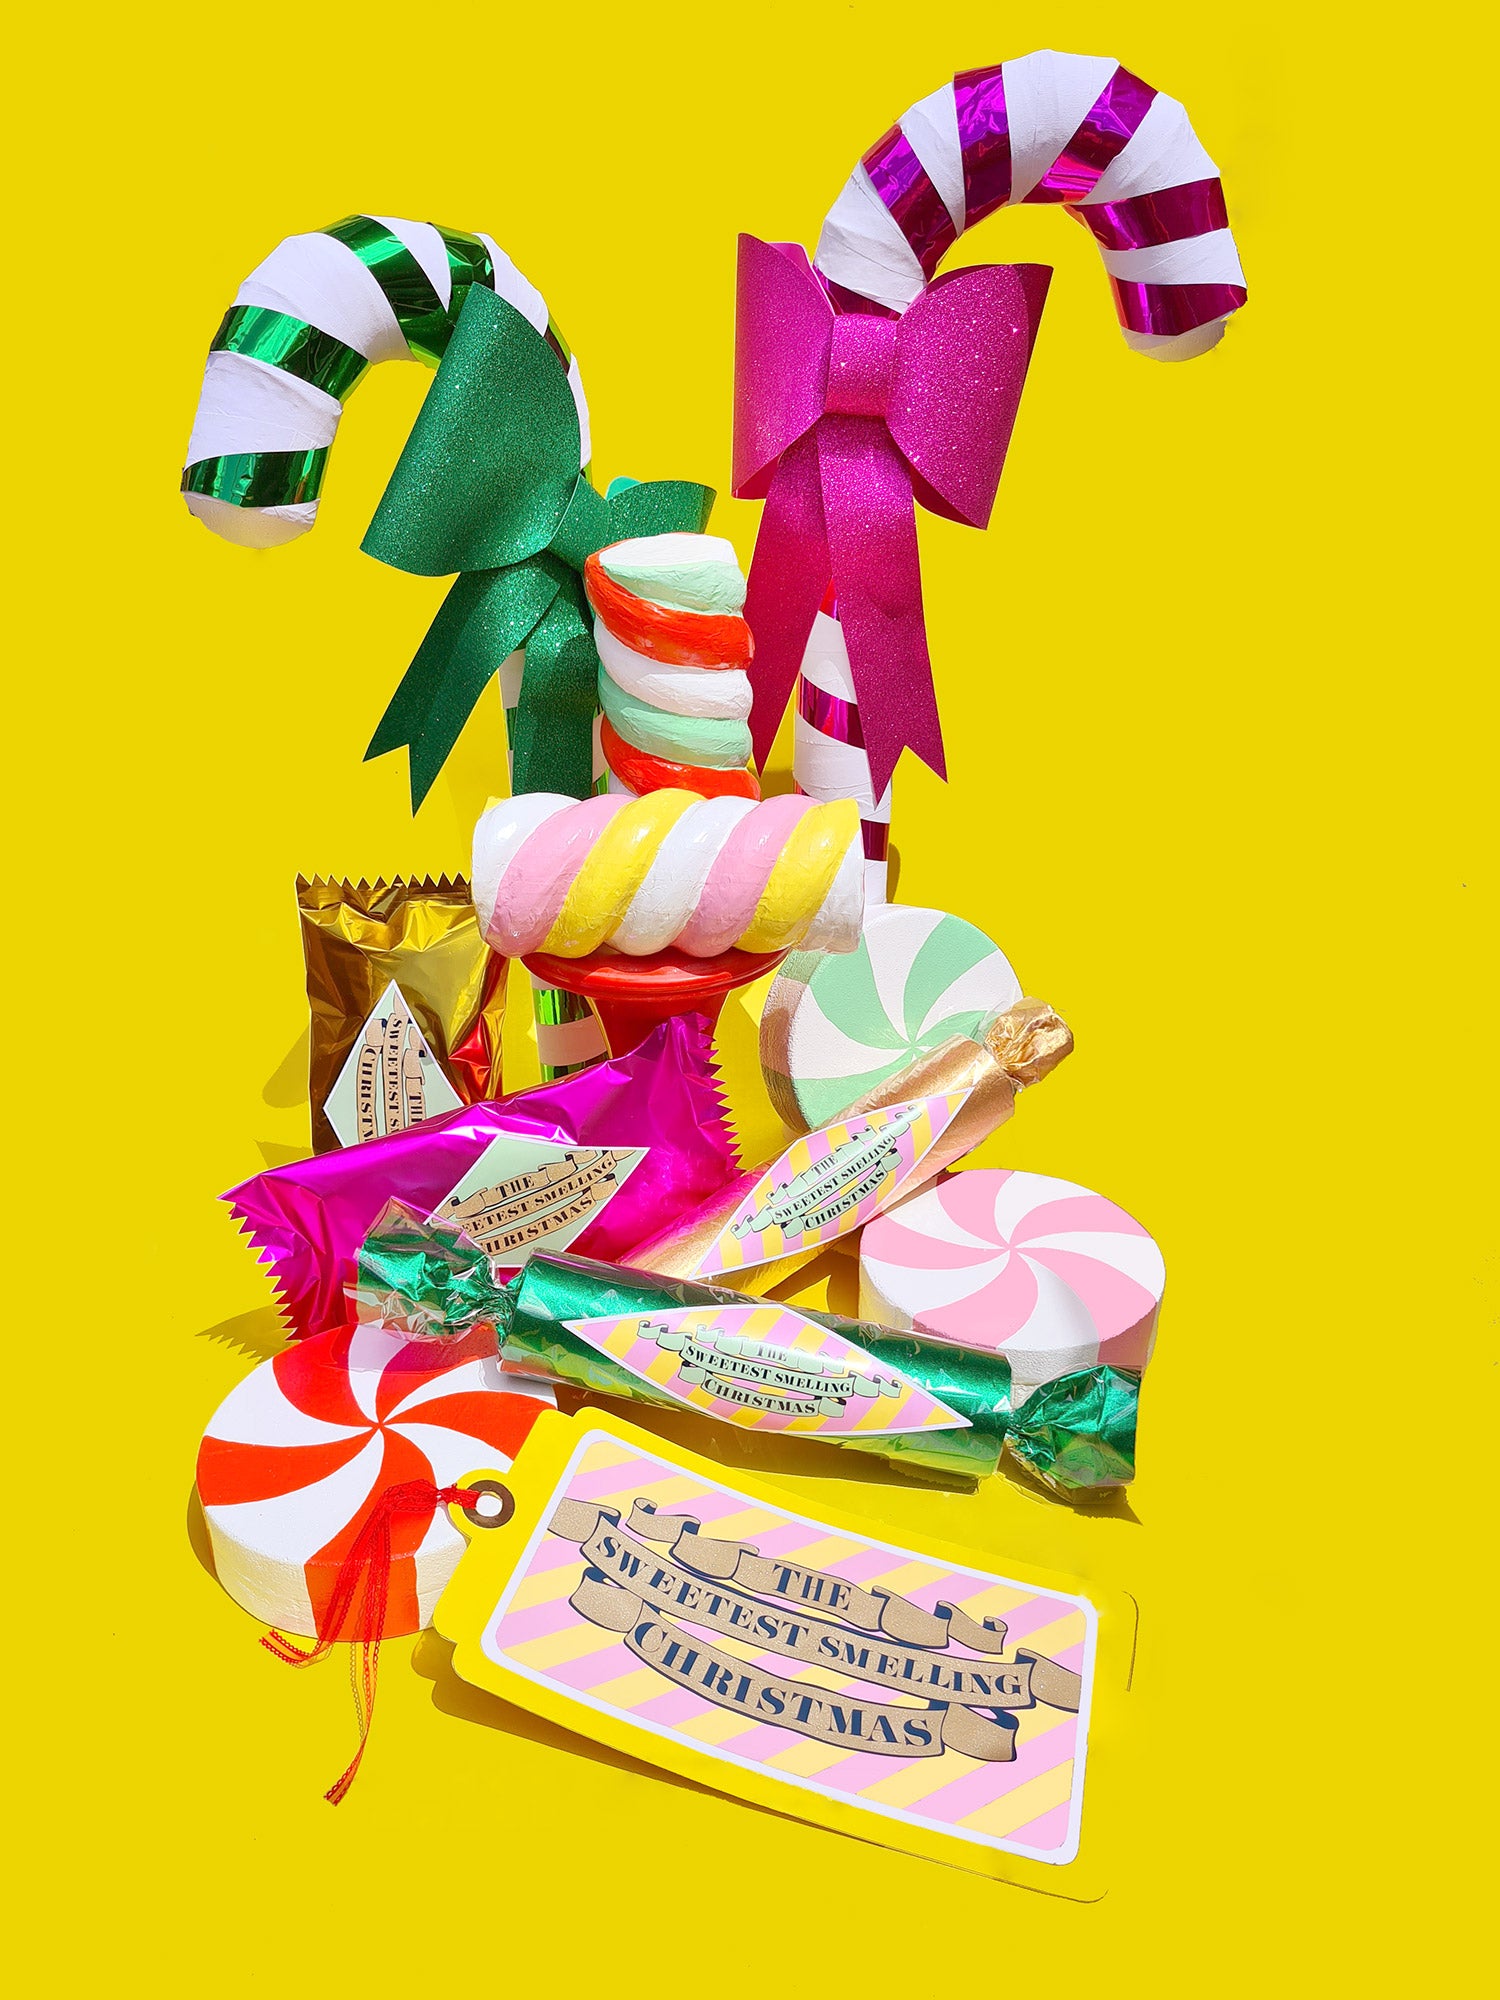 A collection of bright, shiny, giant, handmade Christmas candy props sit together on a yellow background. There are candy canes, wrapped lollies, marshmallow twists, and peppermint swirls. 